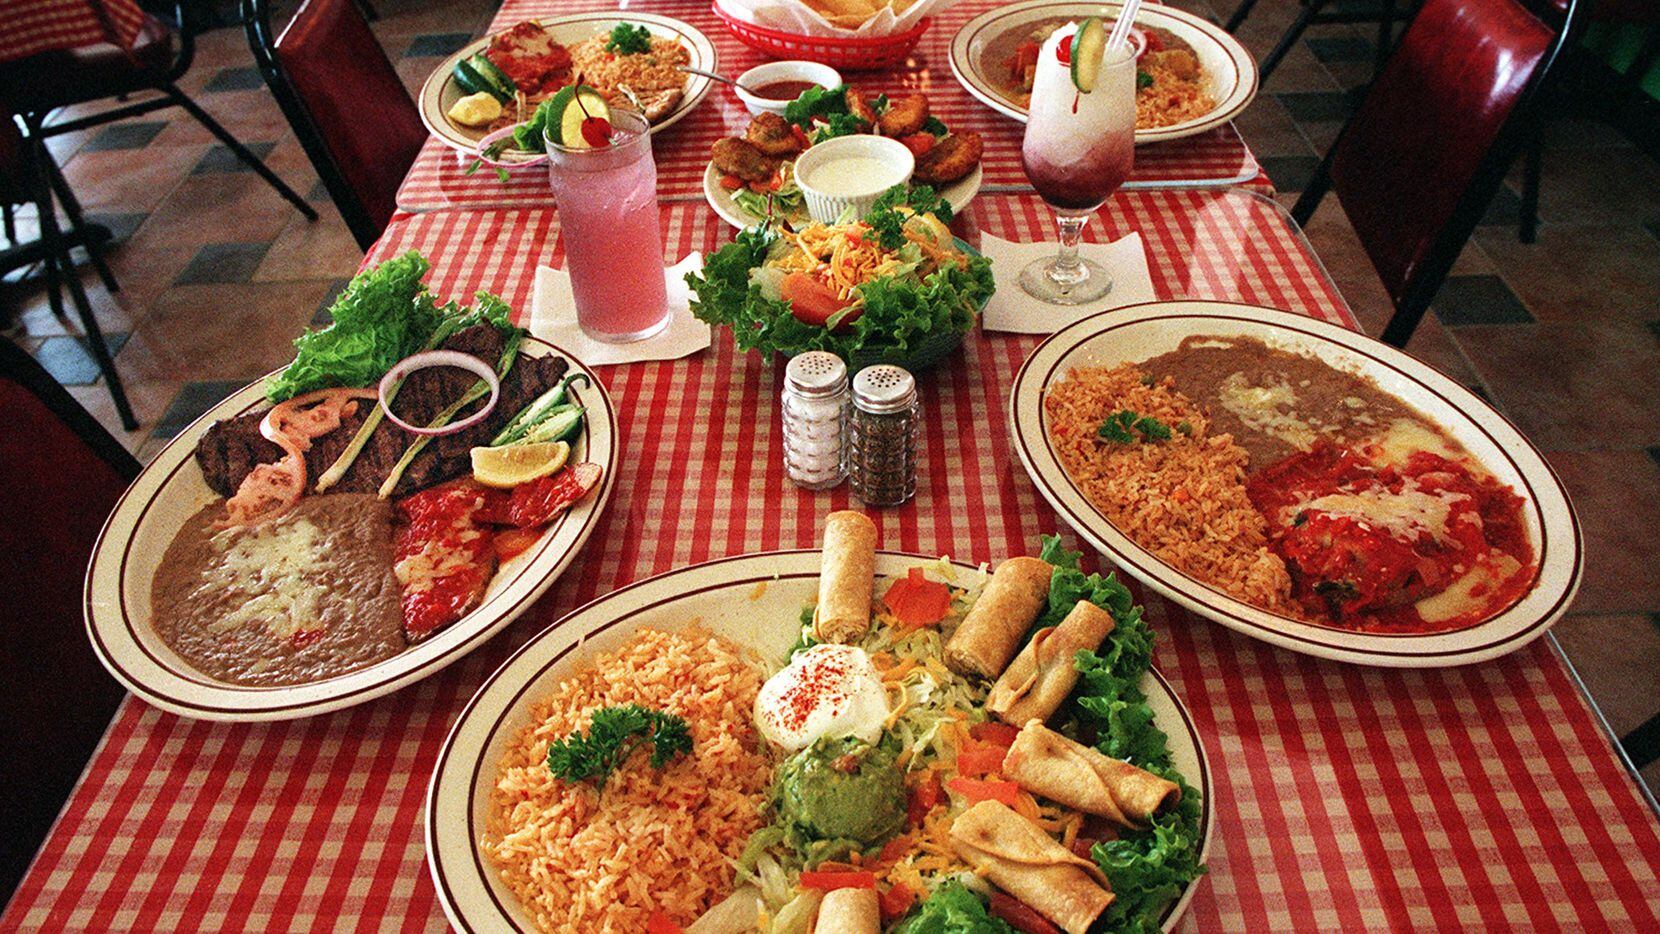 This 1998 file photo shows a table spread with food at Allen's long-running Mexi-Go restaurant.